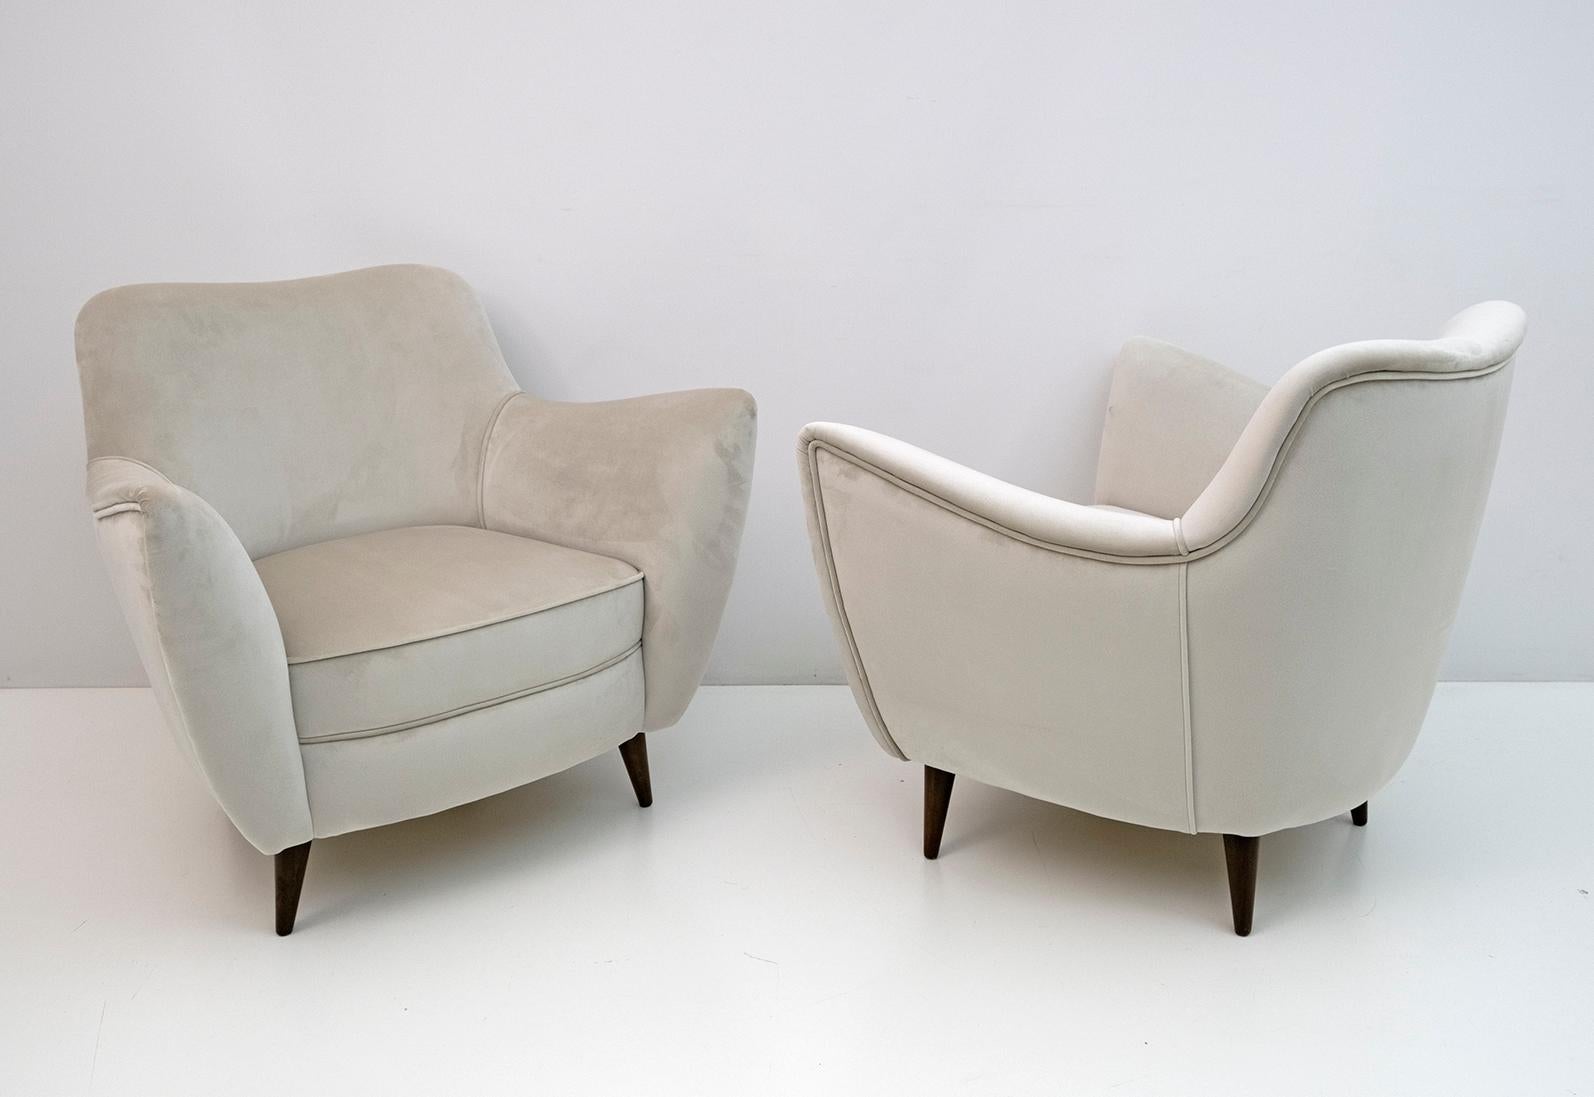 This rare pair of 'Perla' armchairs was designed by Giulia Veronesi and produced by ISA Bergamo, Italy, in the early 1950s. Its sensual curves and elegantly tapered legs give the chair a sculptural and modern look. These stunning armchairs have been